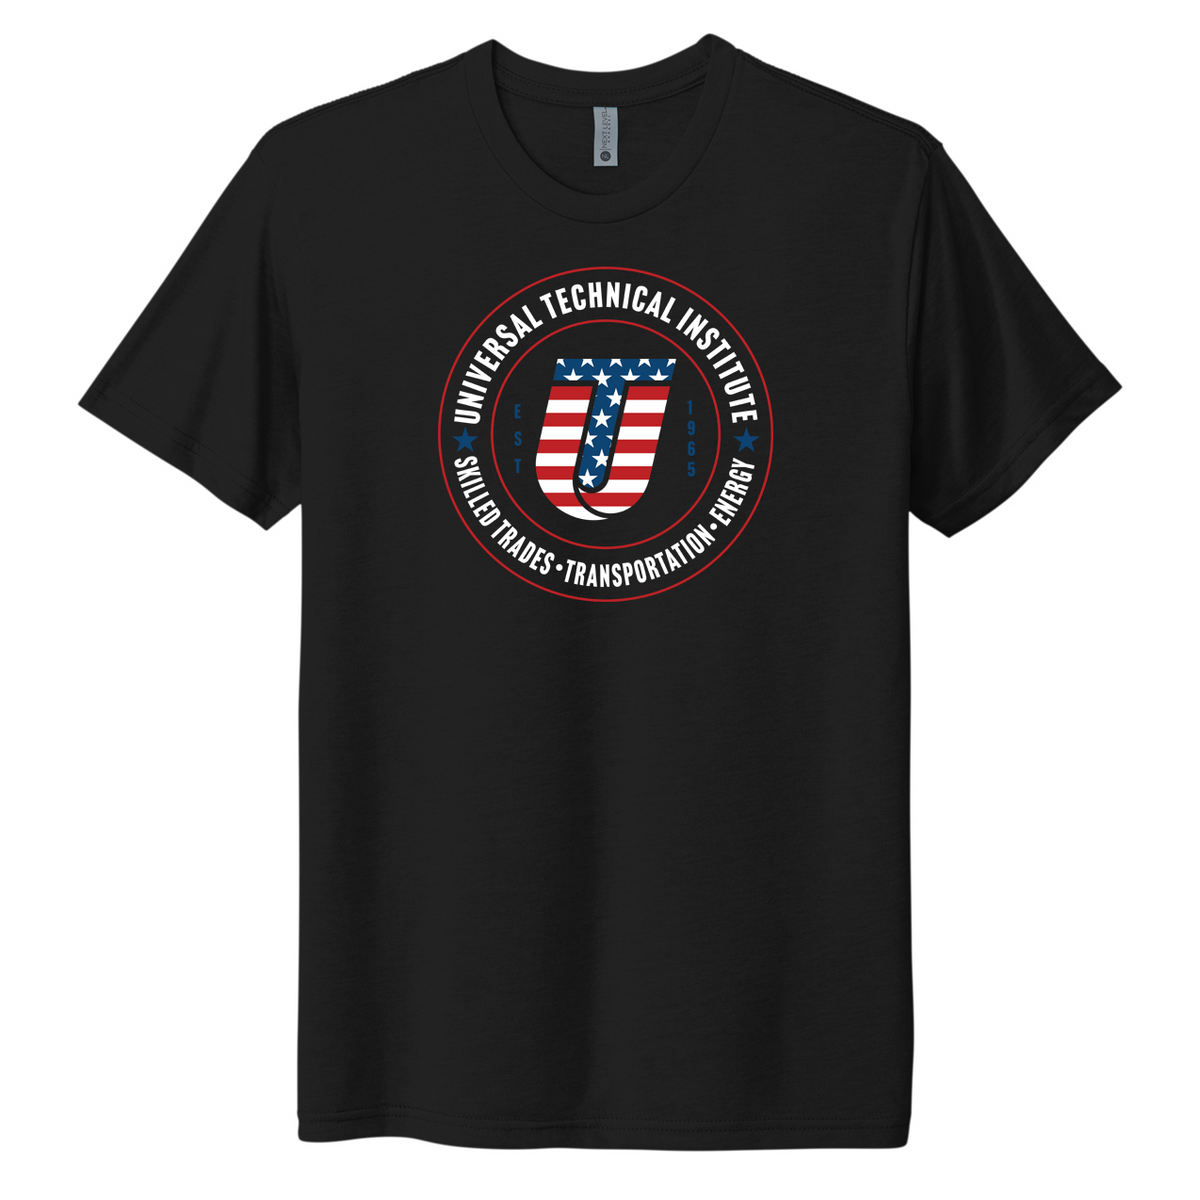 Skilled Trades Graphic T-Shirt